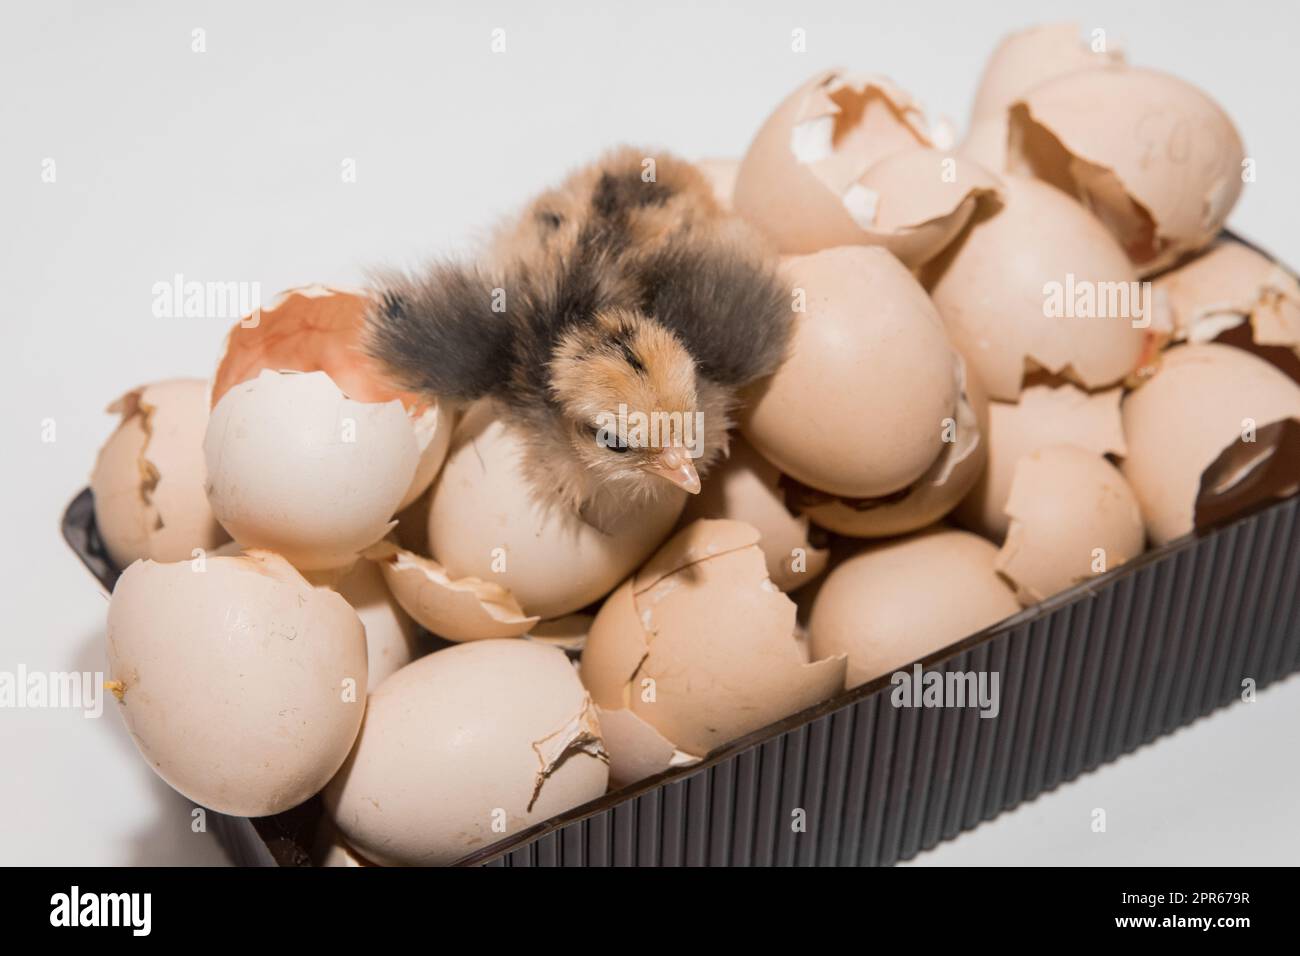 Newborn chicken little cute small chick in eggshell pile on white background. Stock Photo